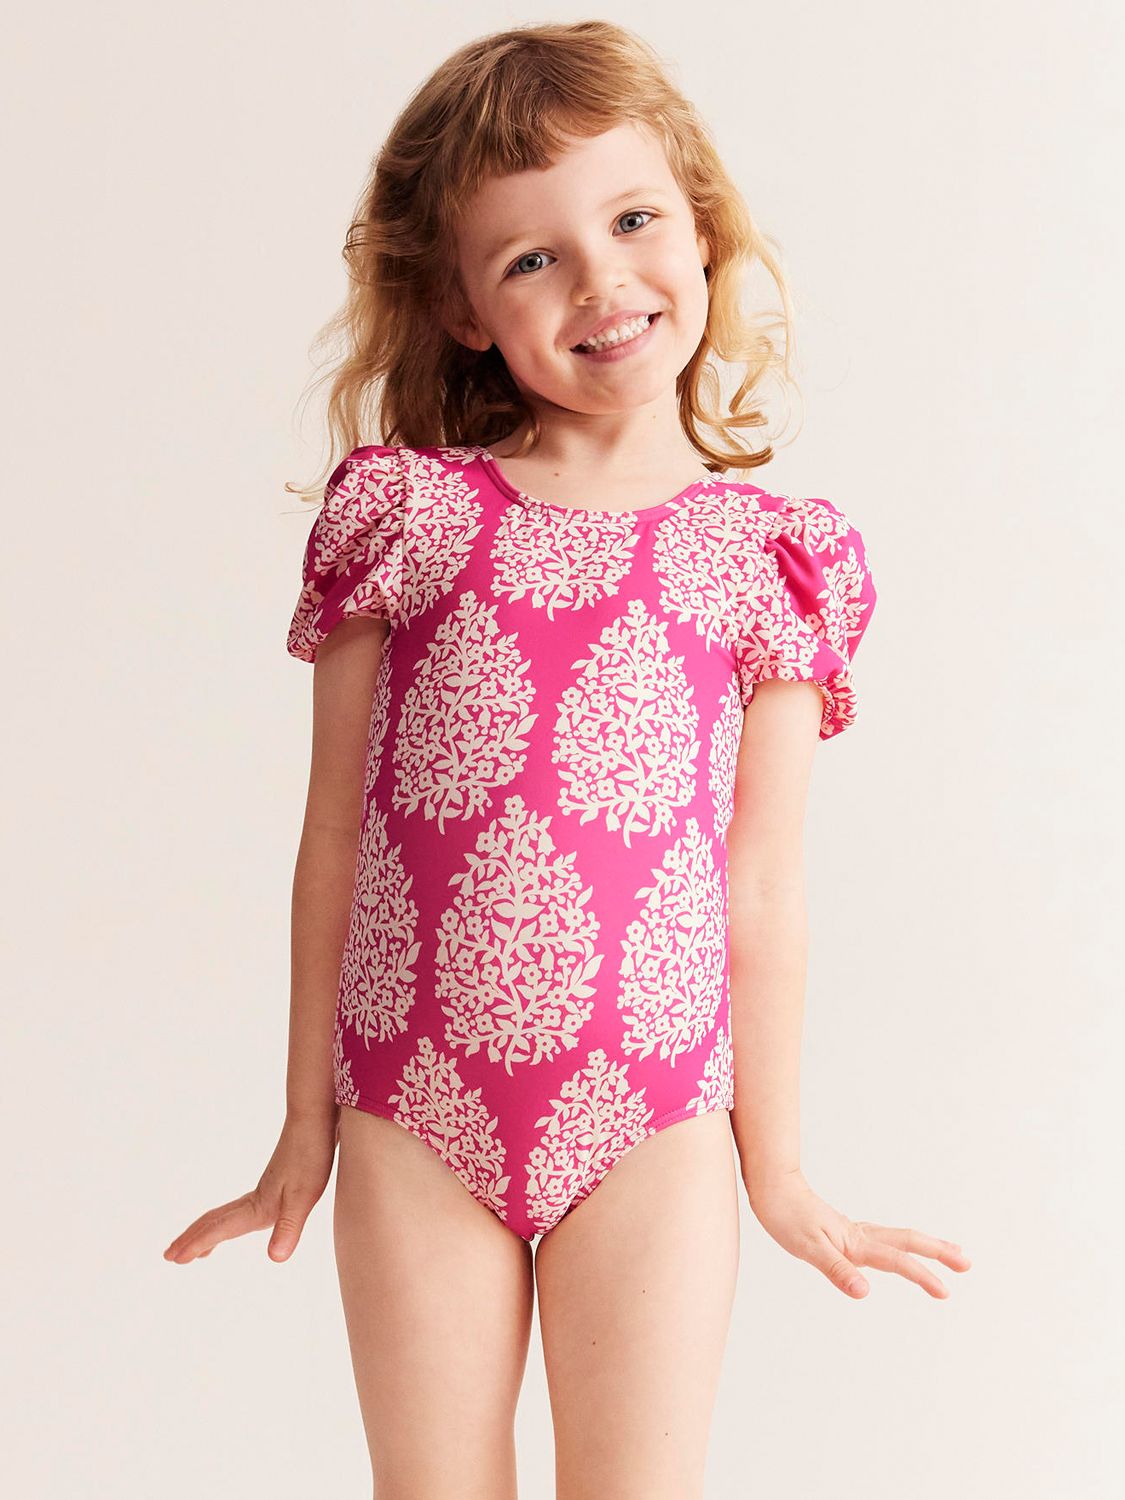 Mini Boden Kids' Floral Print Puff Sleeve Swimsuit, Pink, 2-3 years